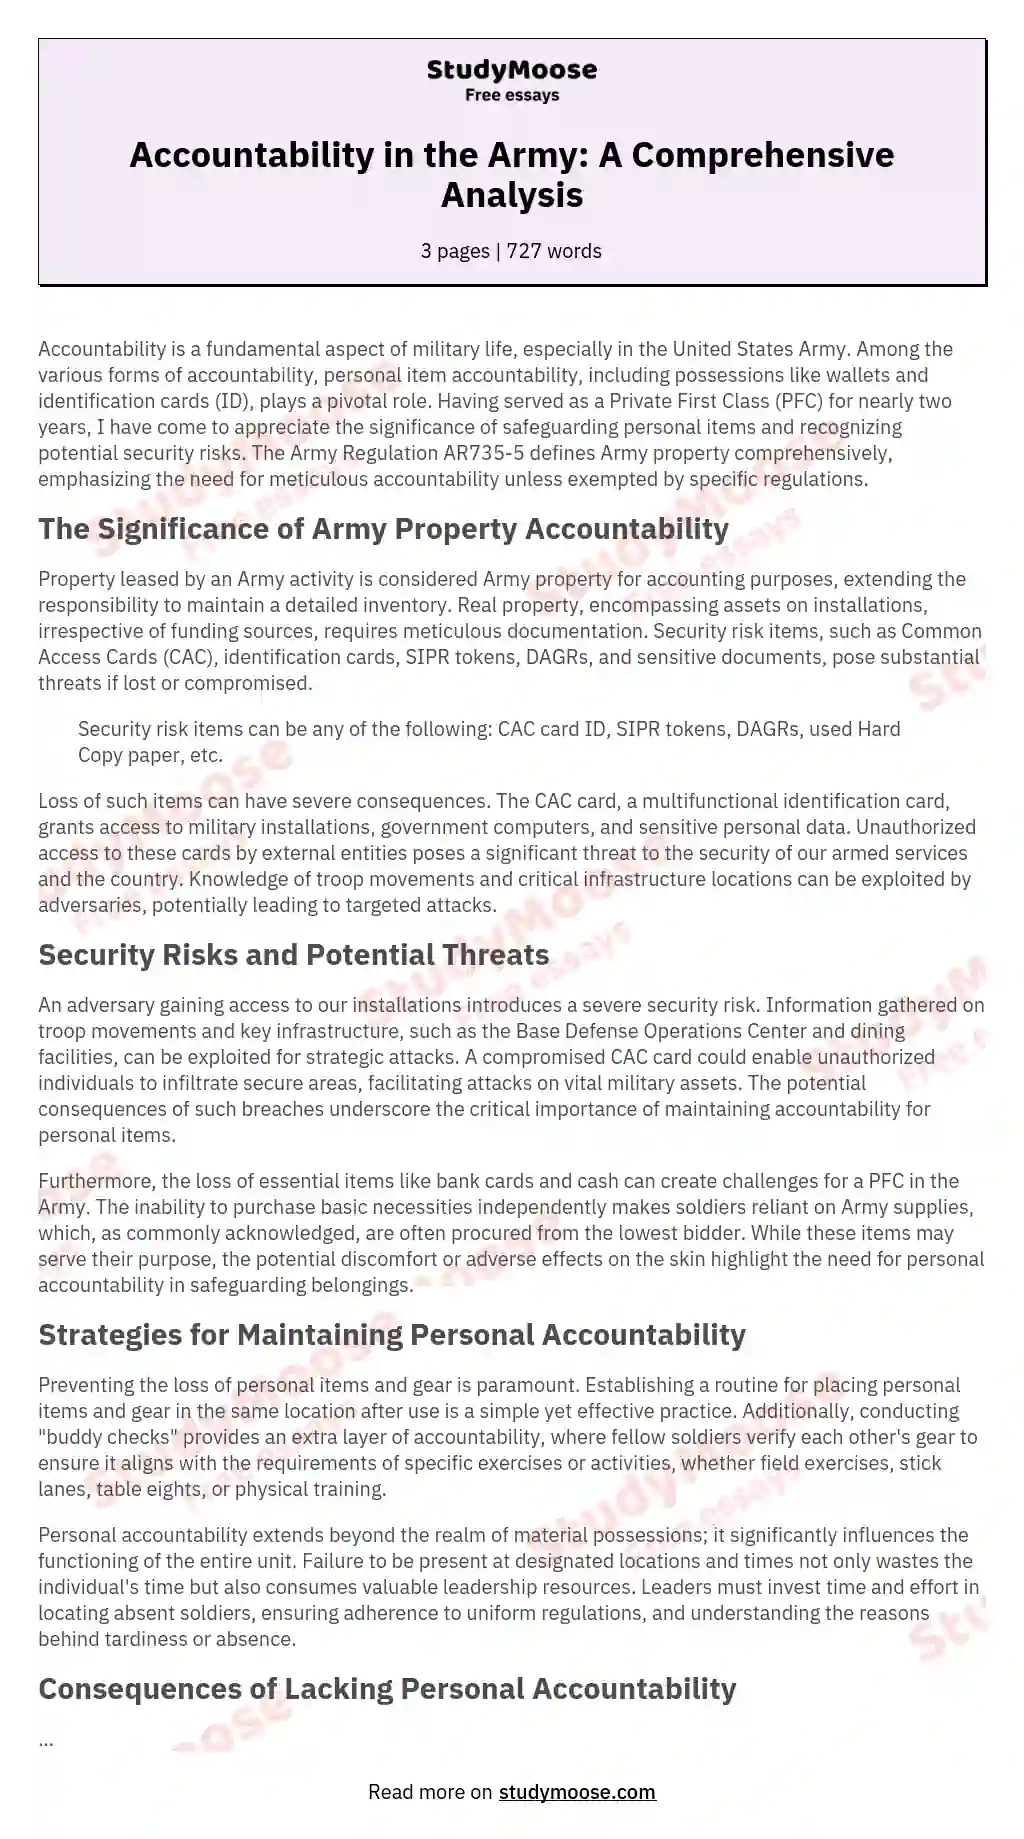 Accountability in the Army: A Comprehensive Analysis essay